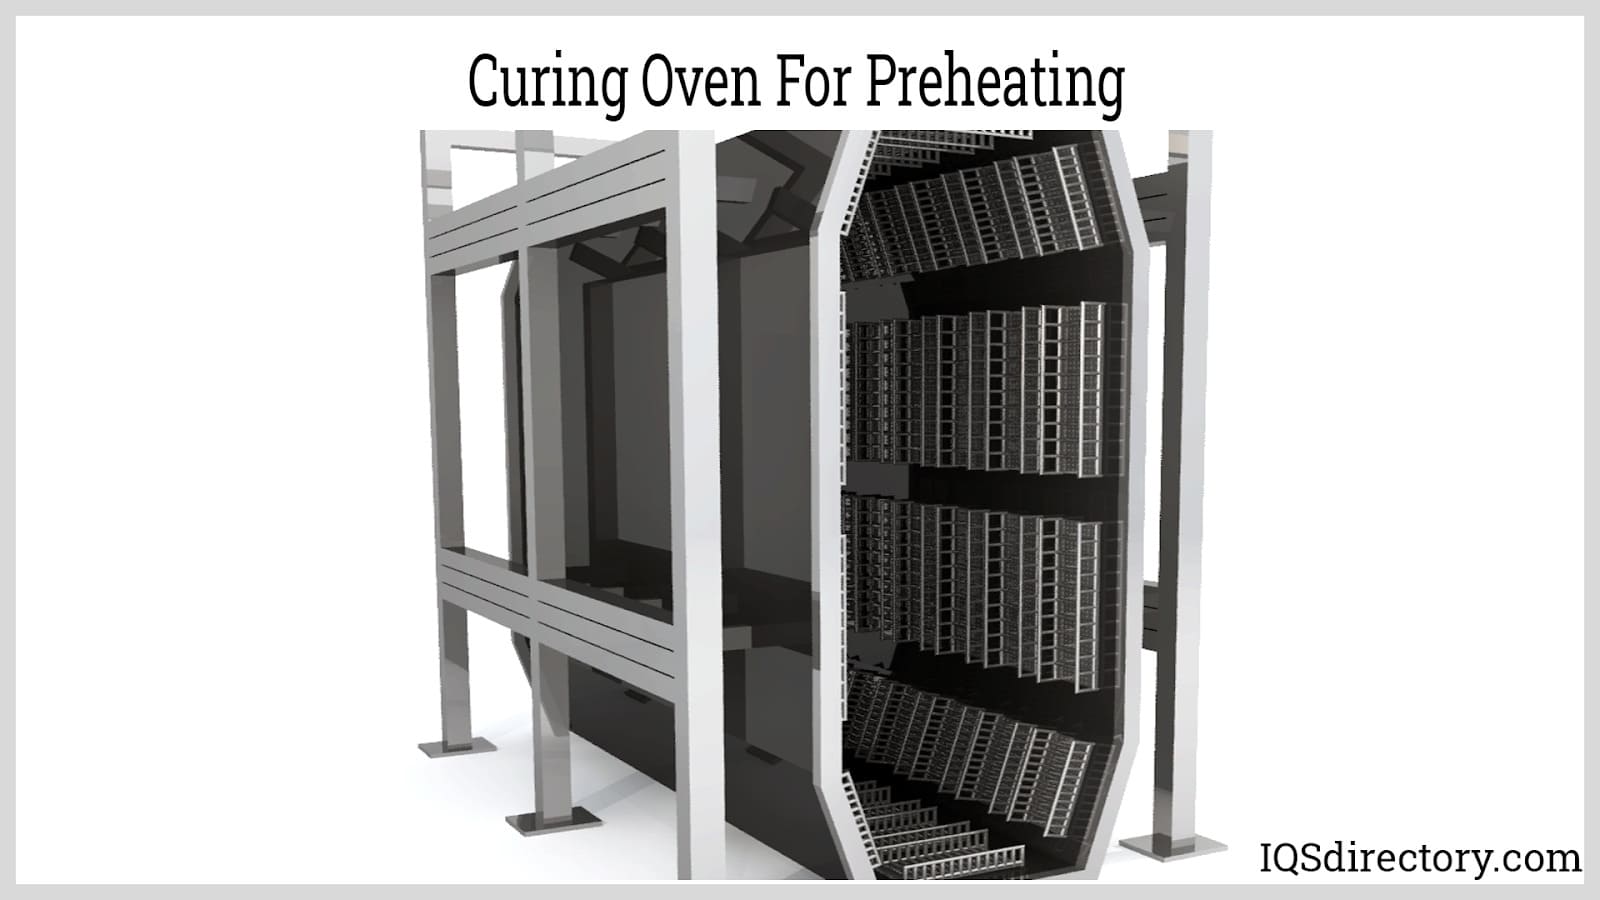 https://www.iqsdirectory.com/articles/industrial-oven/curing-ovens/curing-oven-for-preheating.jpg